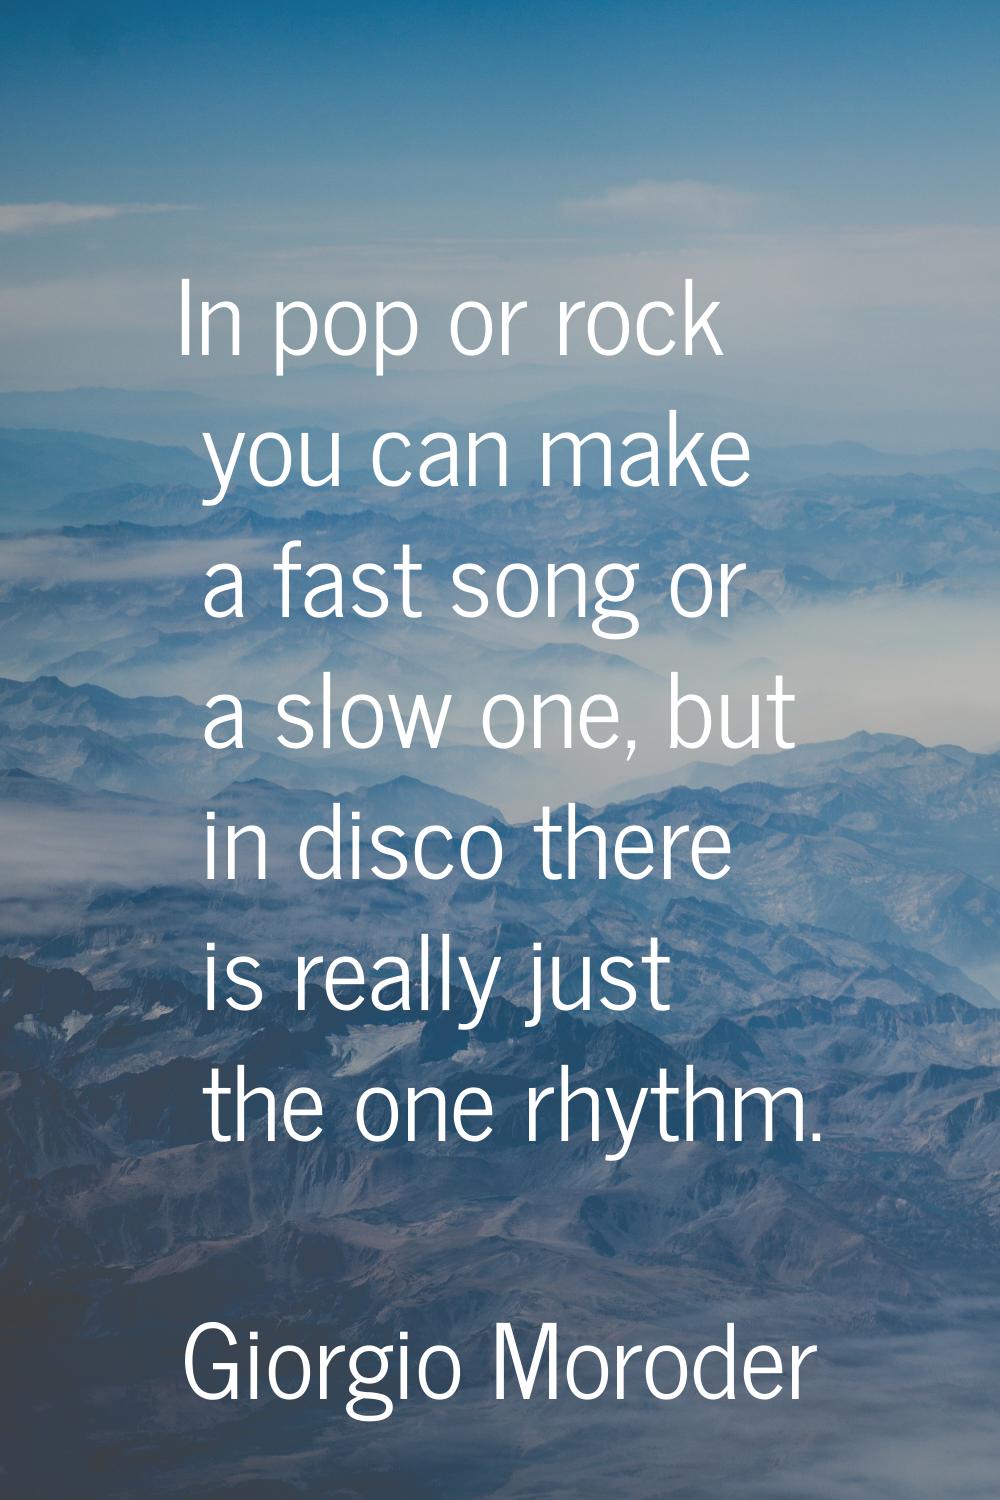 In pop or rock you can make a fast song or a slow one, but in disco there is really just the one rh